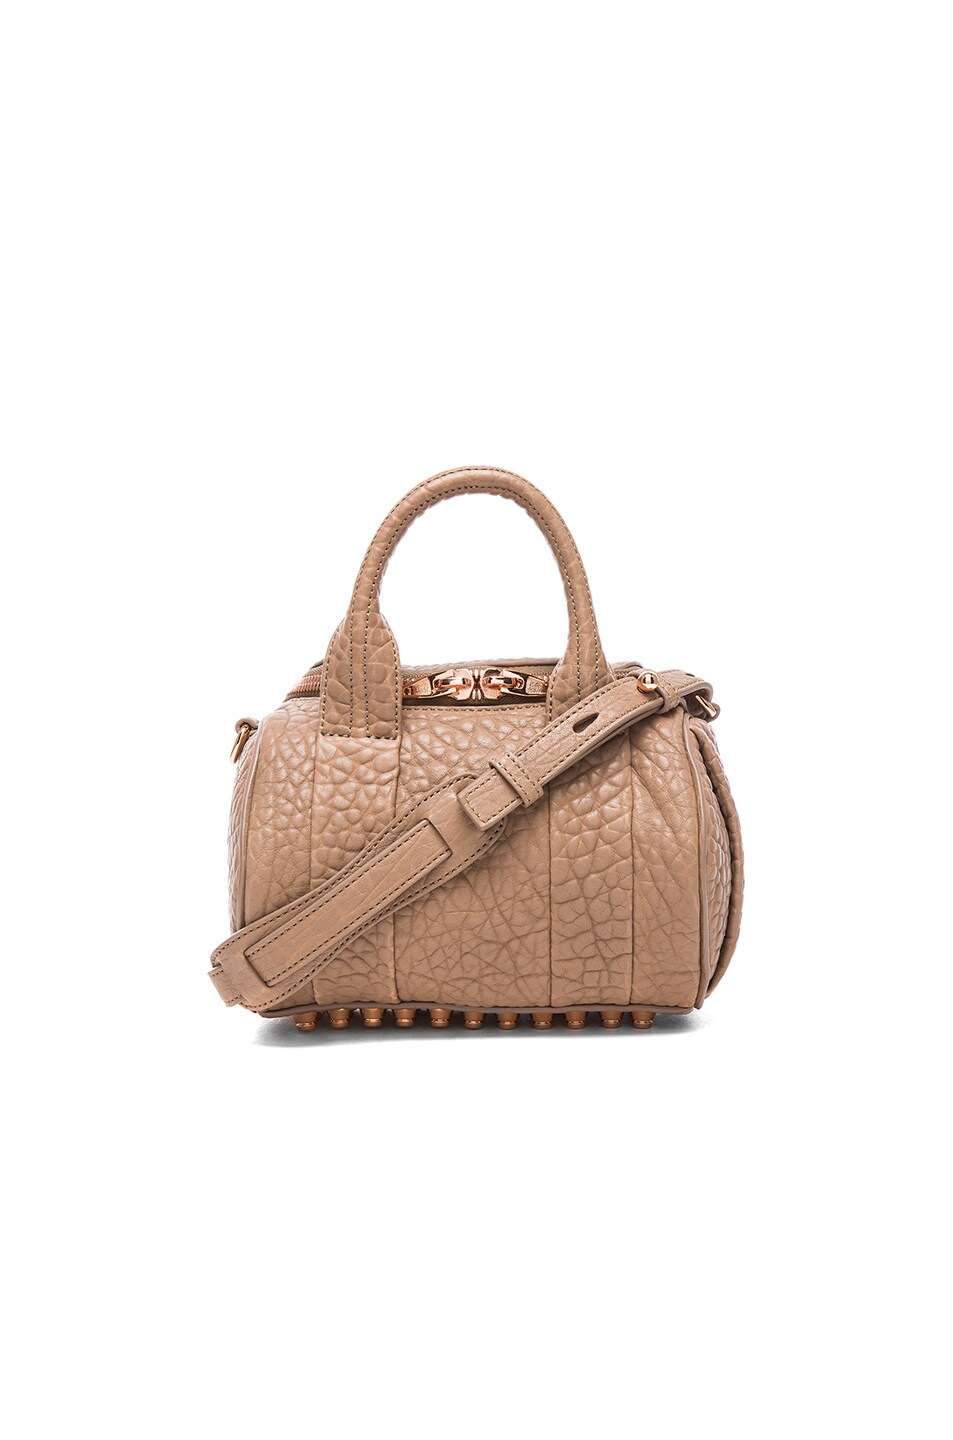 Image 1 of Alexander Wang Mini Rockie Satchel with Rose Gold Hardware in Latte